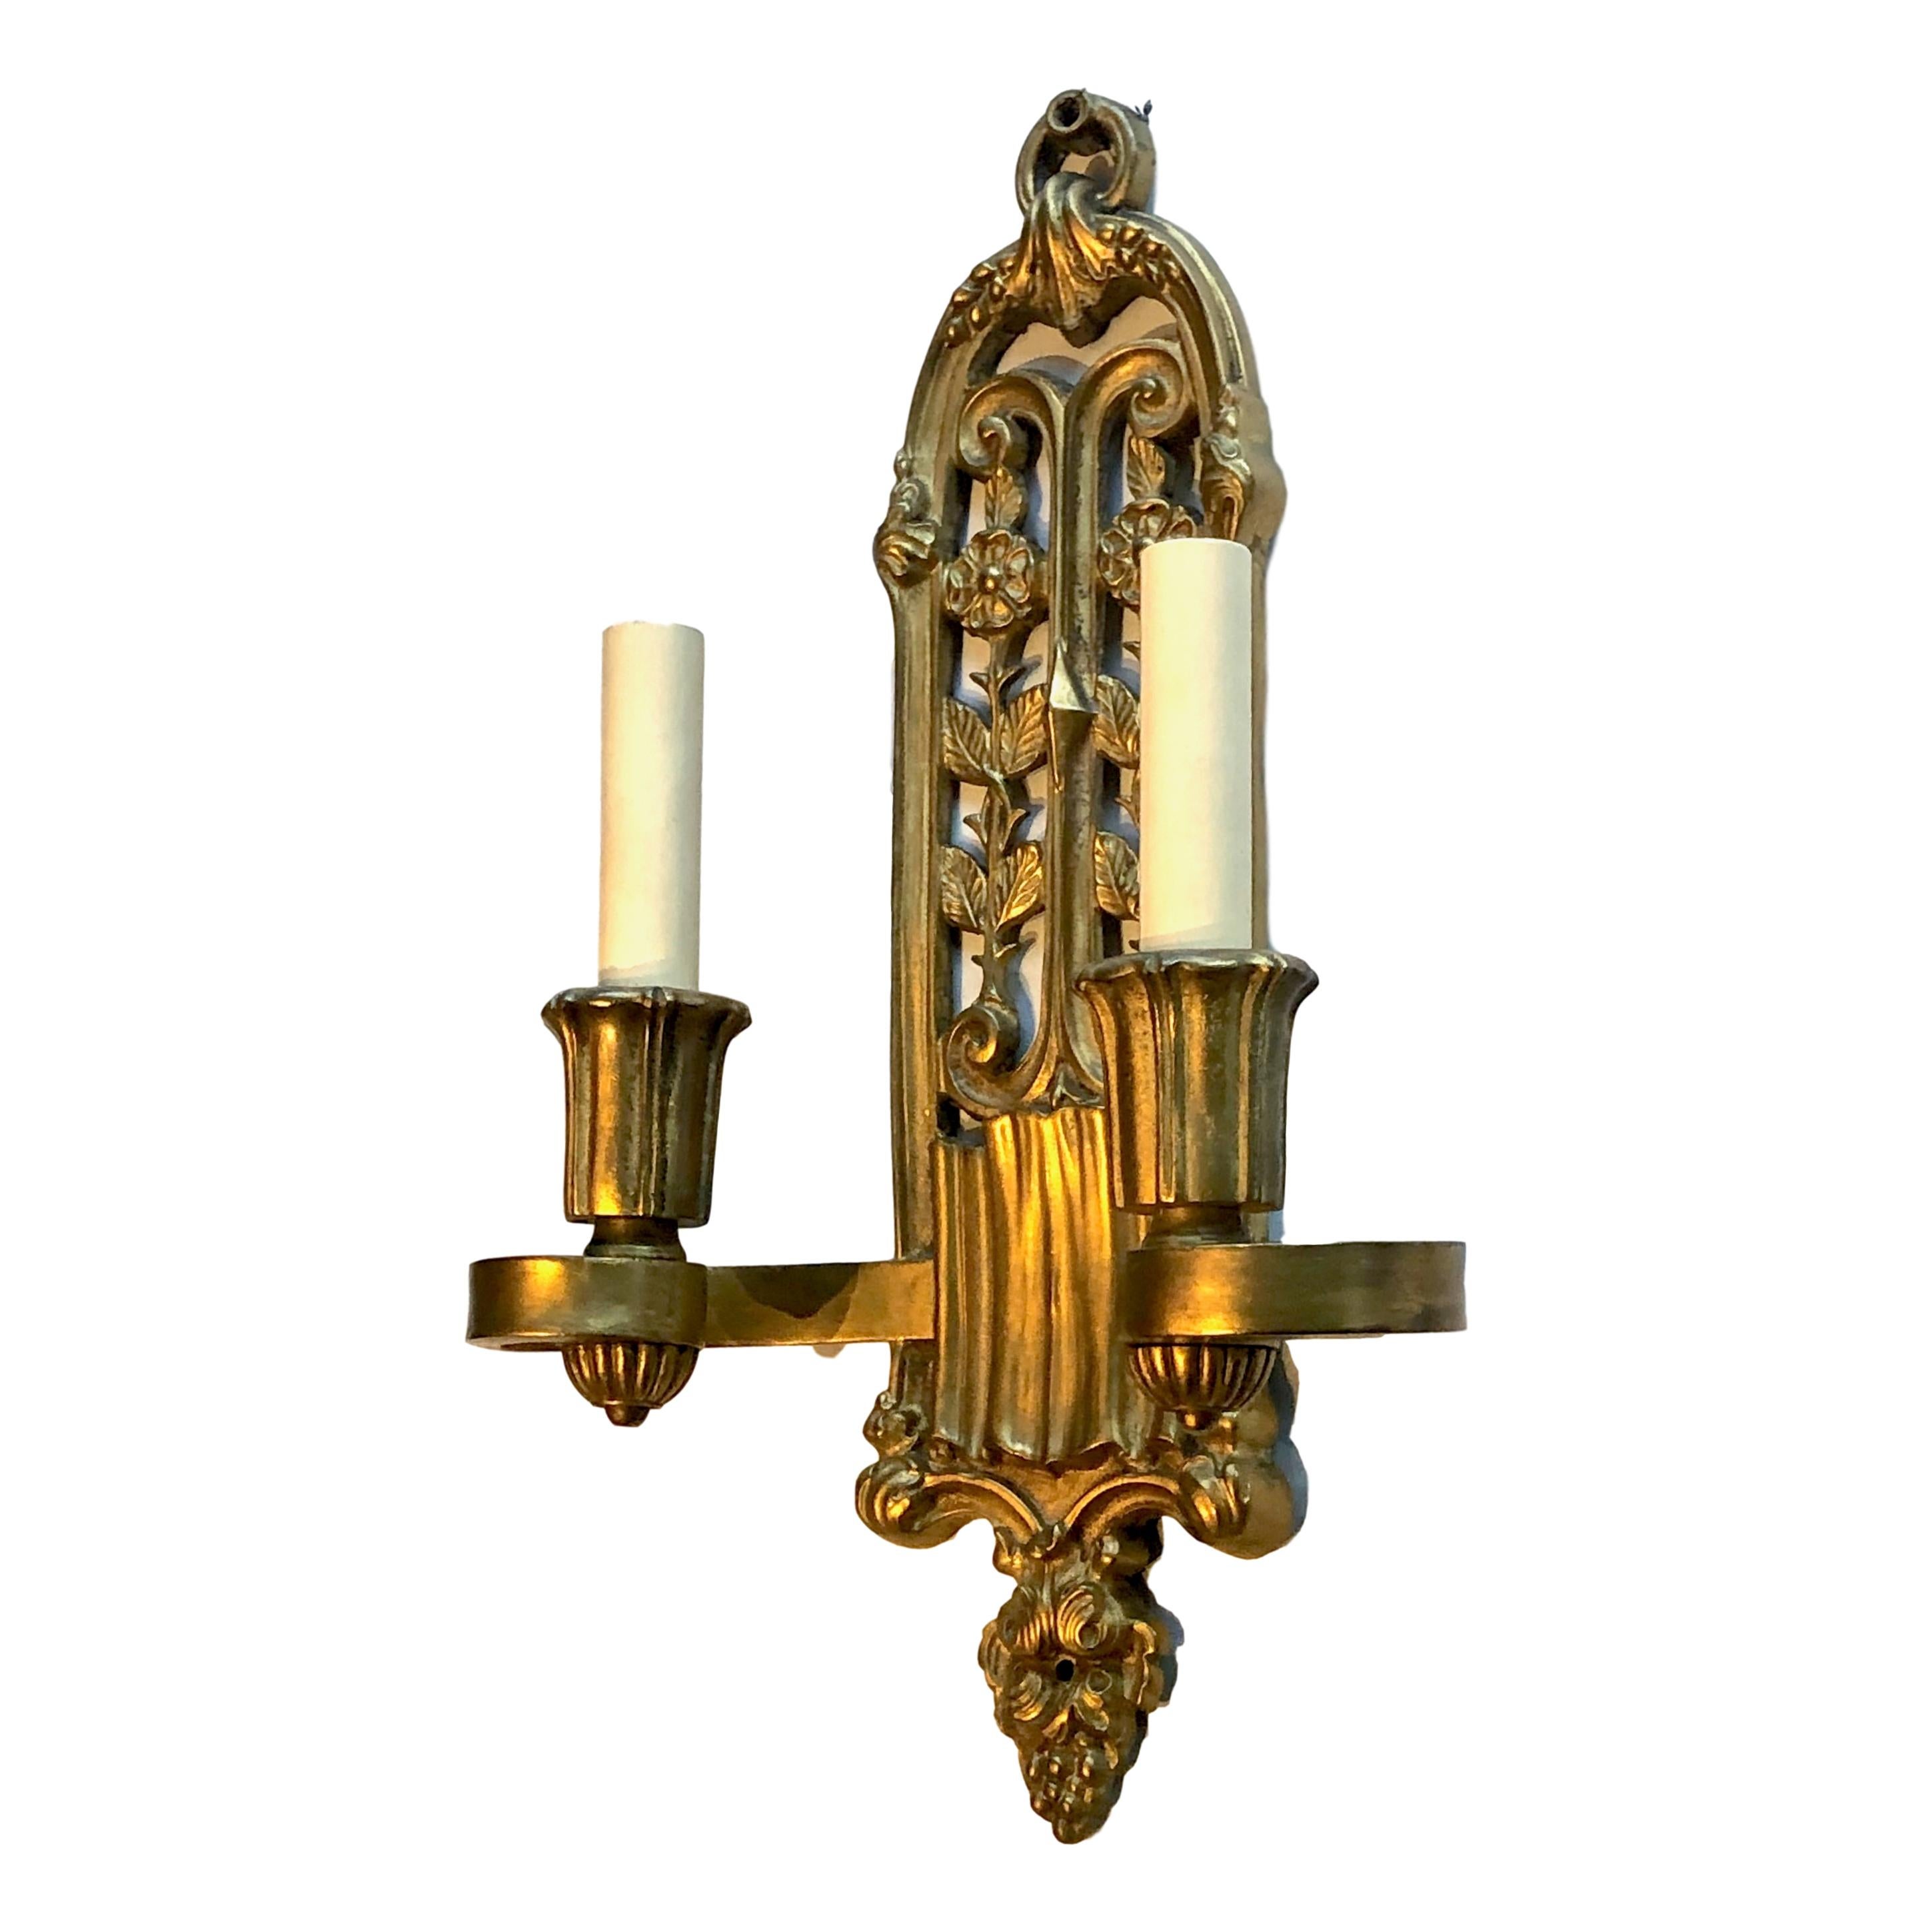 A pair of English circa 1900 gilt bronze sconces with open-work body in foliage and floral motif.

Measurements:
Height: 16